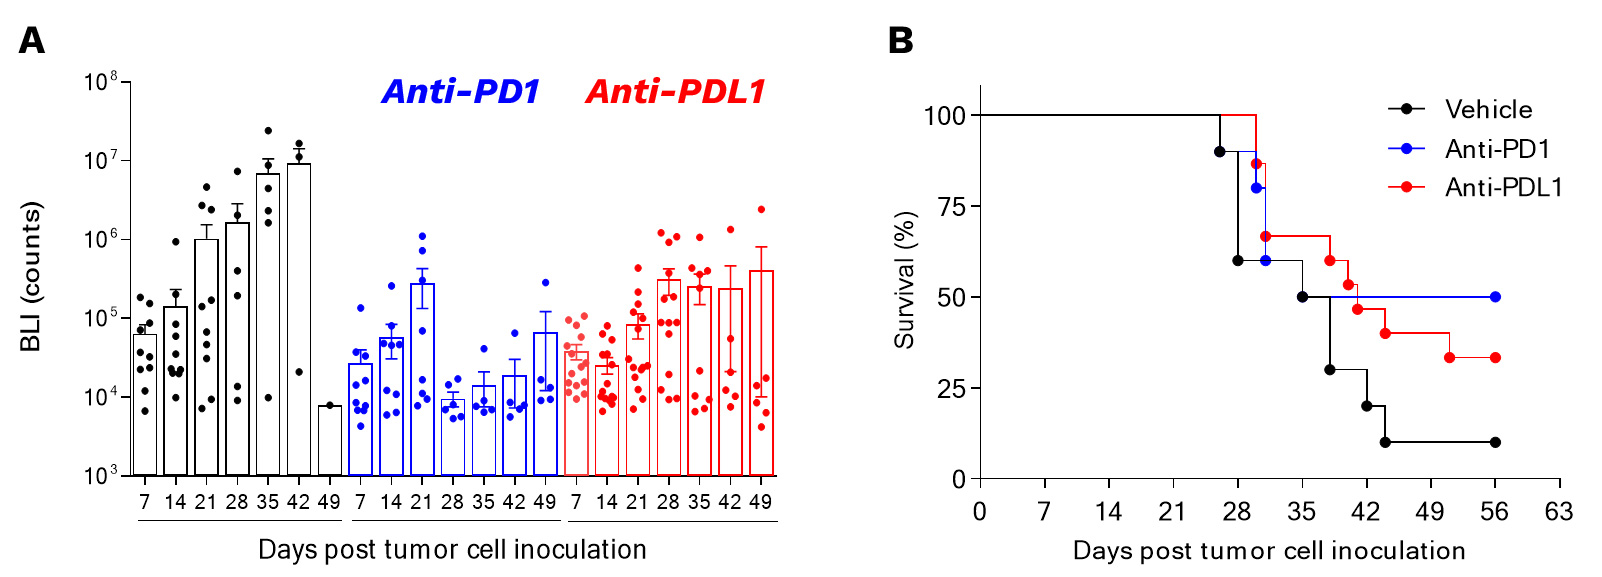 Orthotopic syngeneic GL261 glioblastoma model is responsive to PD1/PDL1 axis blockade